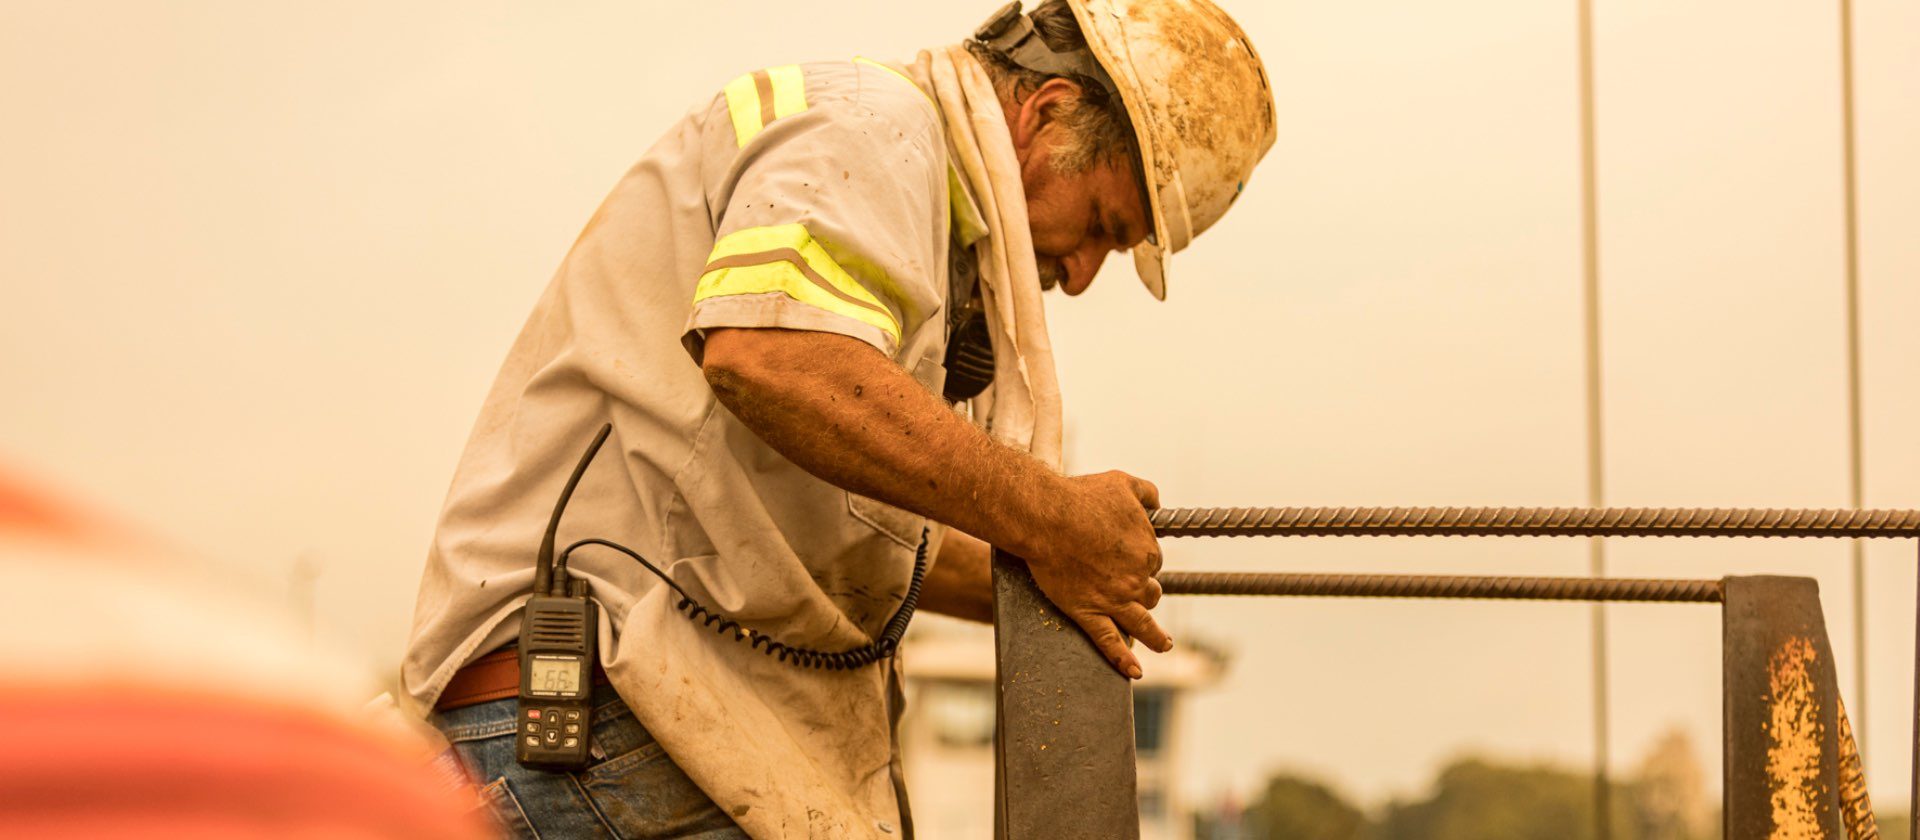 Photograph of a dock worker